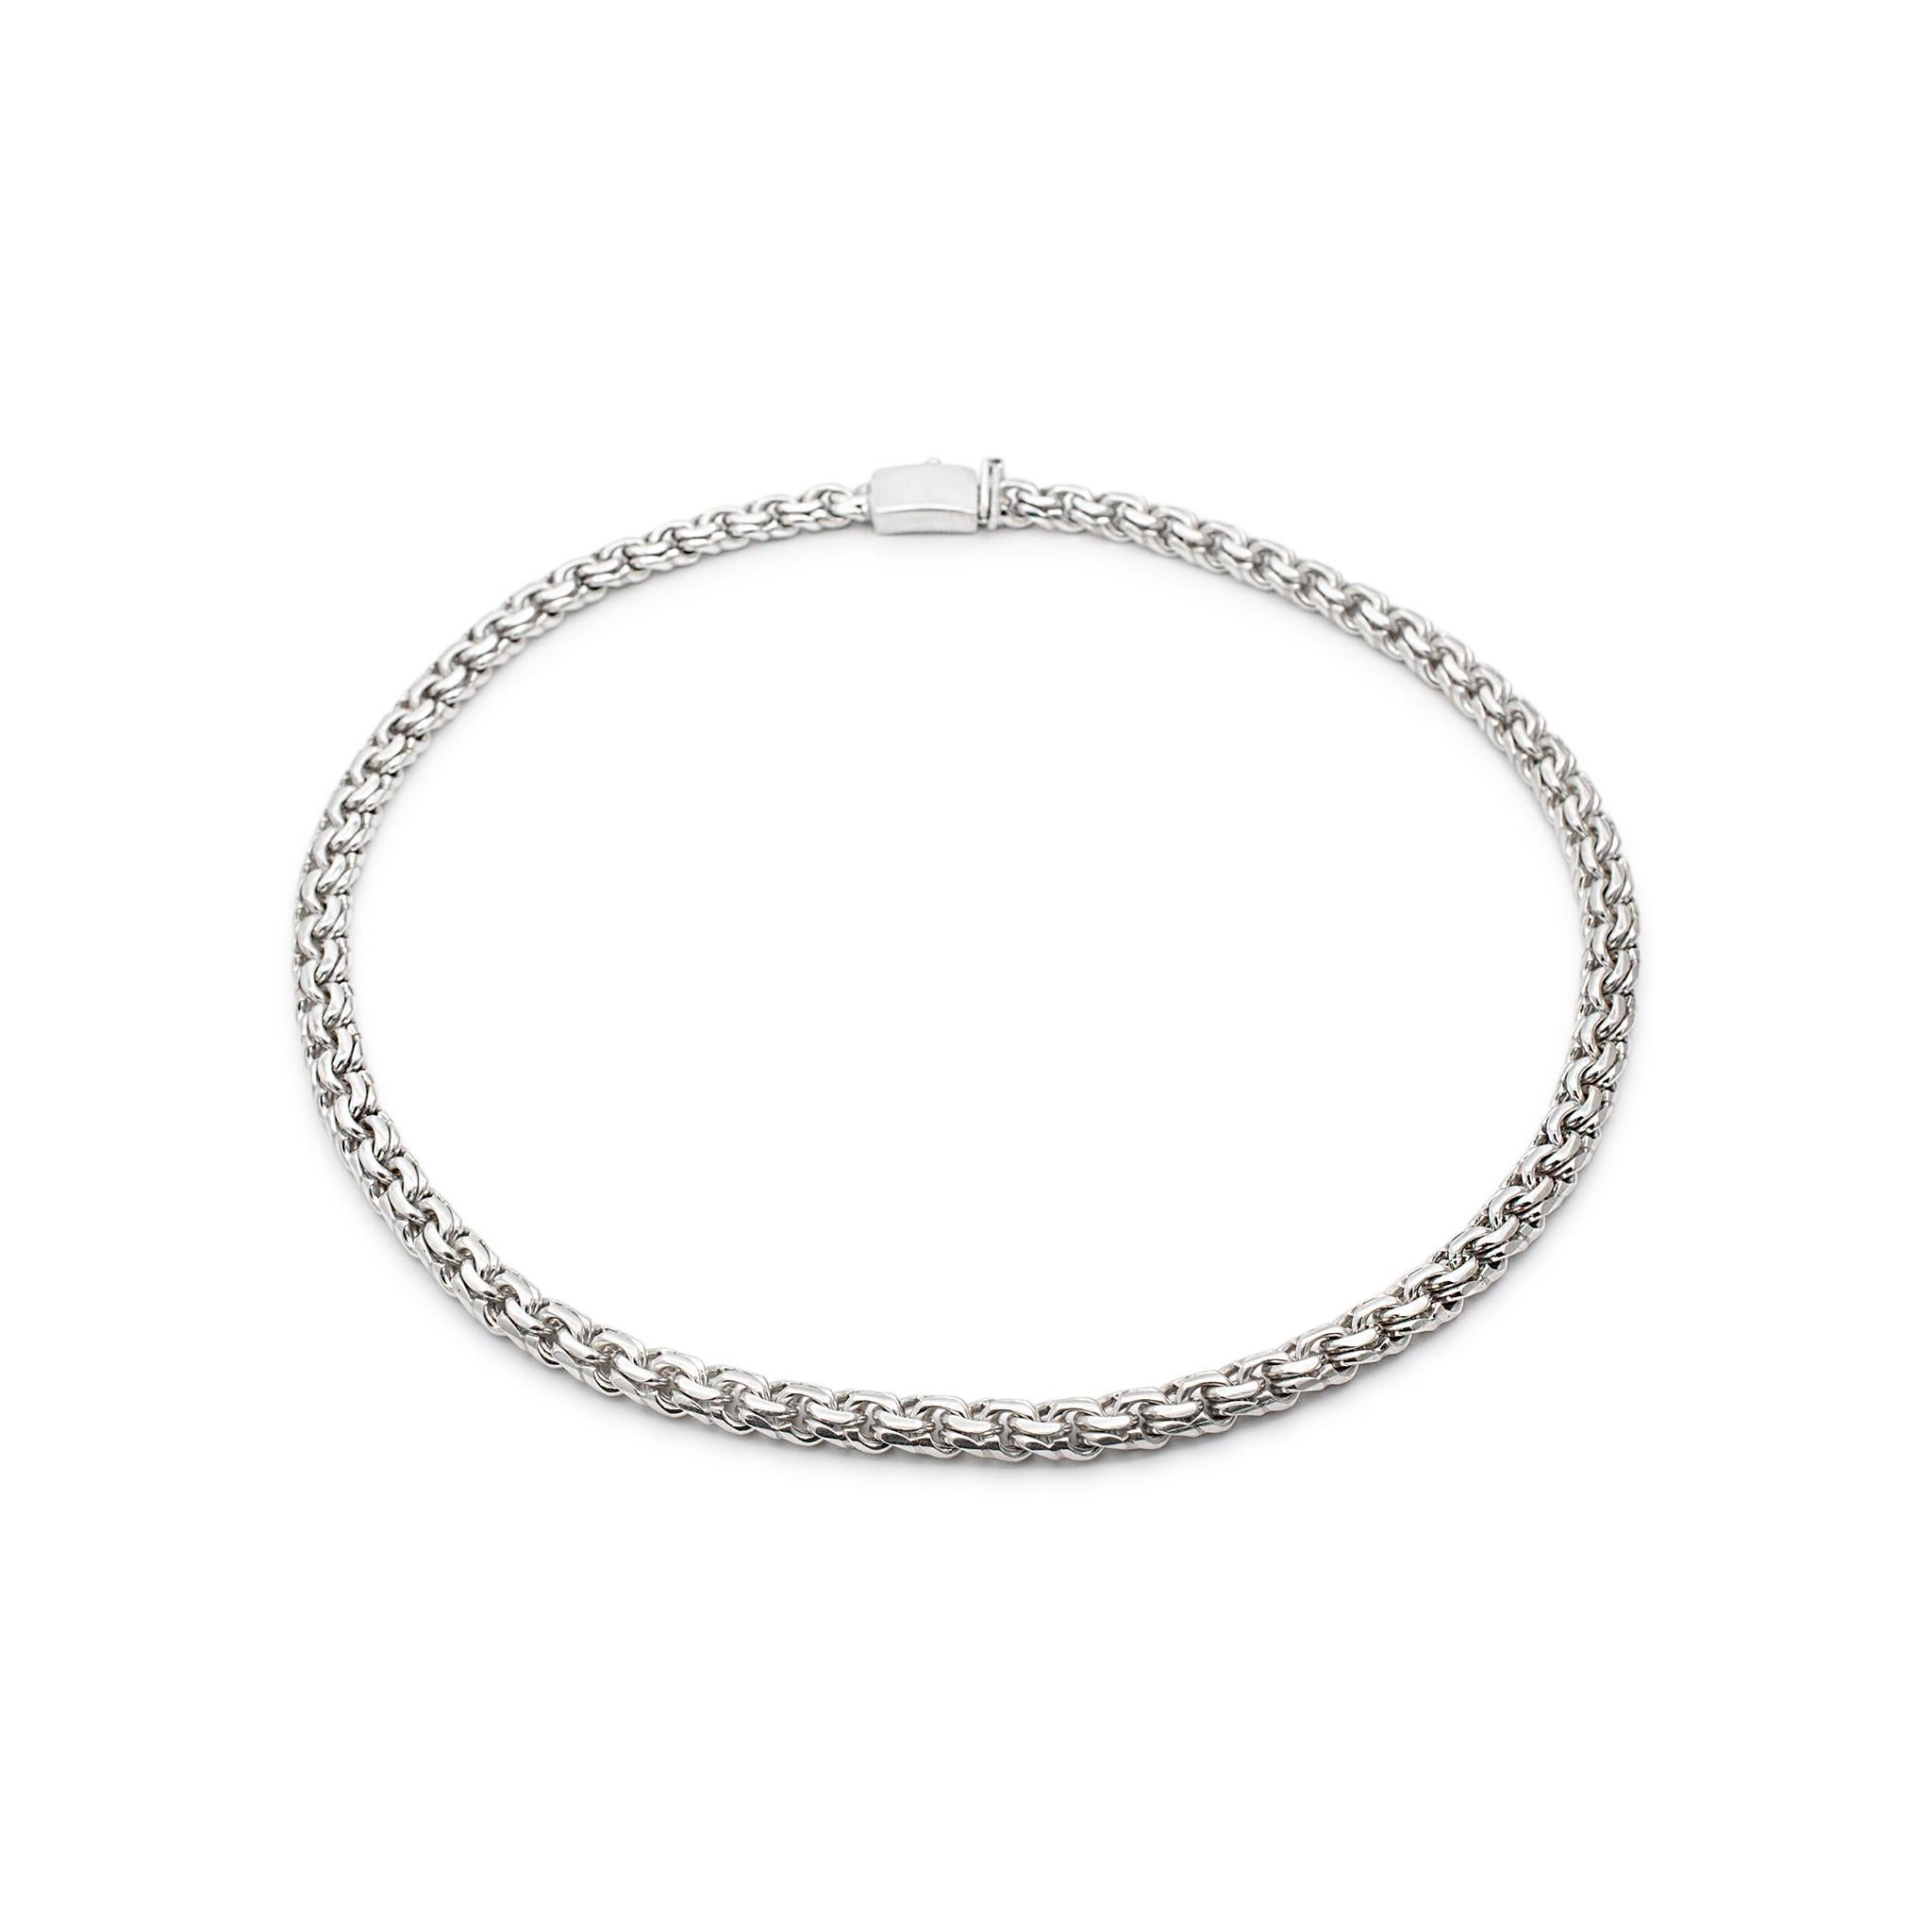 Gender: Ladies

Metal Type: 925 Sterling Silver

Length : 21.00 inches

Width: 8.00 mm

Total weight: 112.48 grams

Silver Wheat Link Chain. Engraved with 